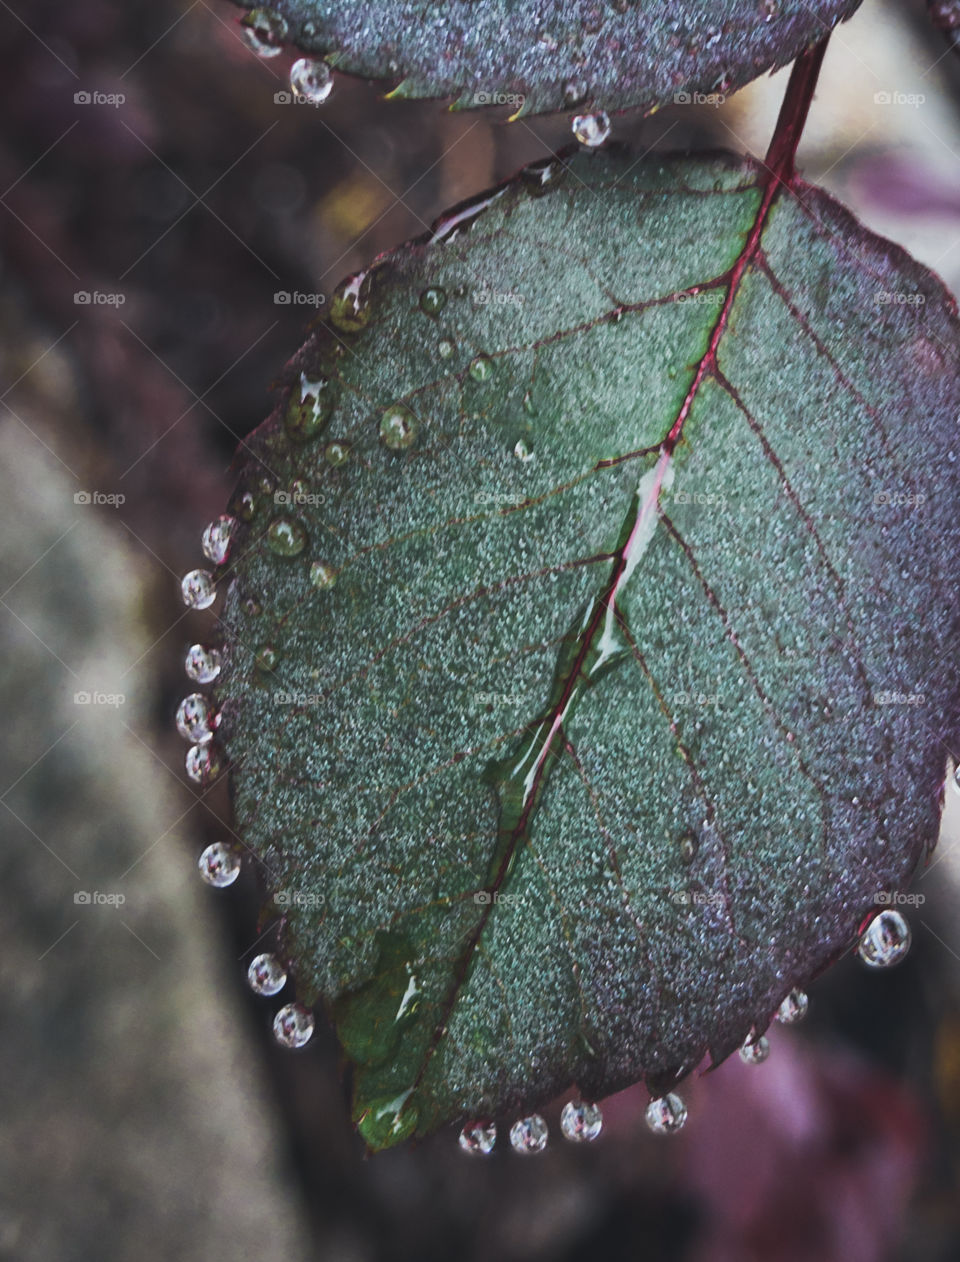 Raindrops on roses - water droplets on a purple and green rose bush leaf